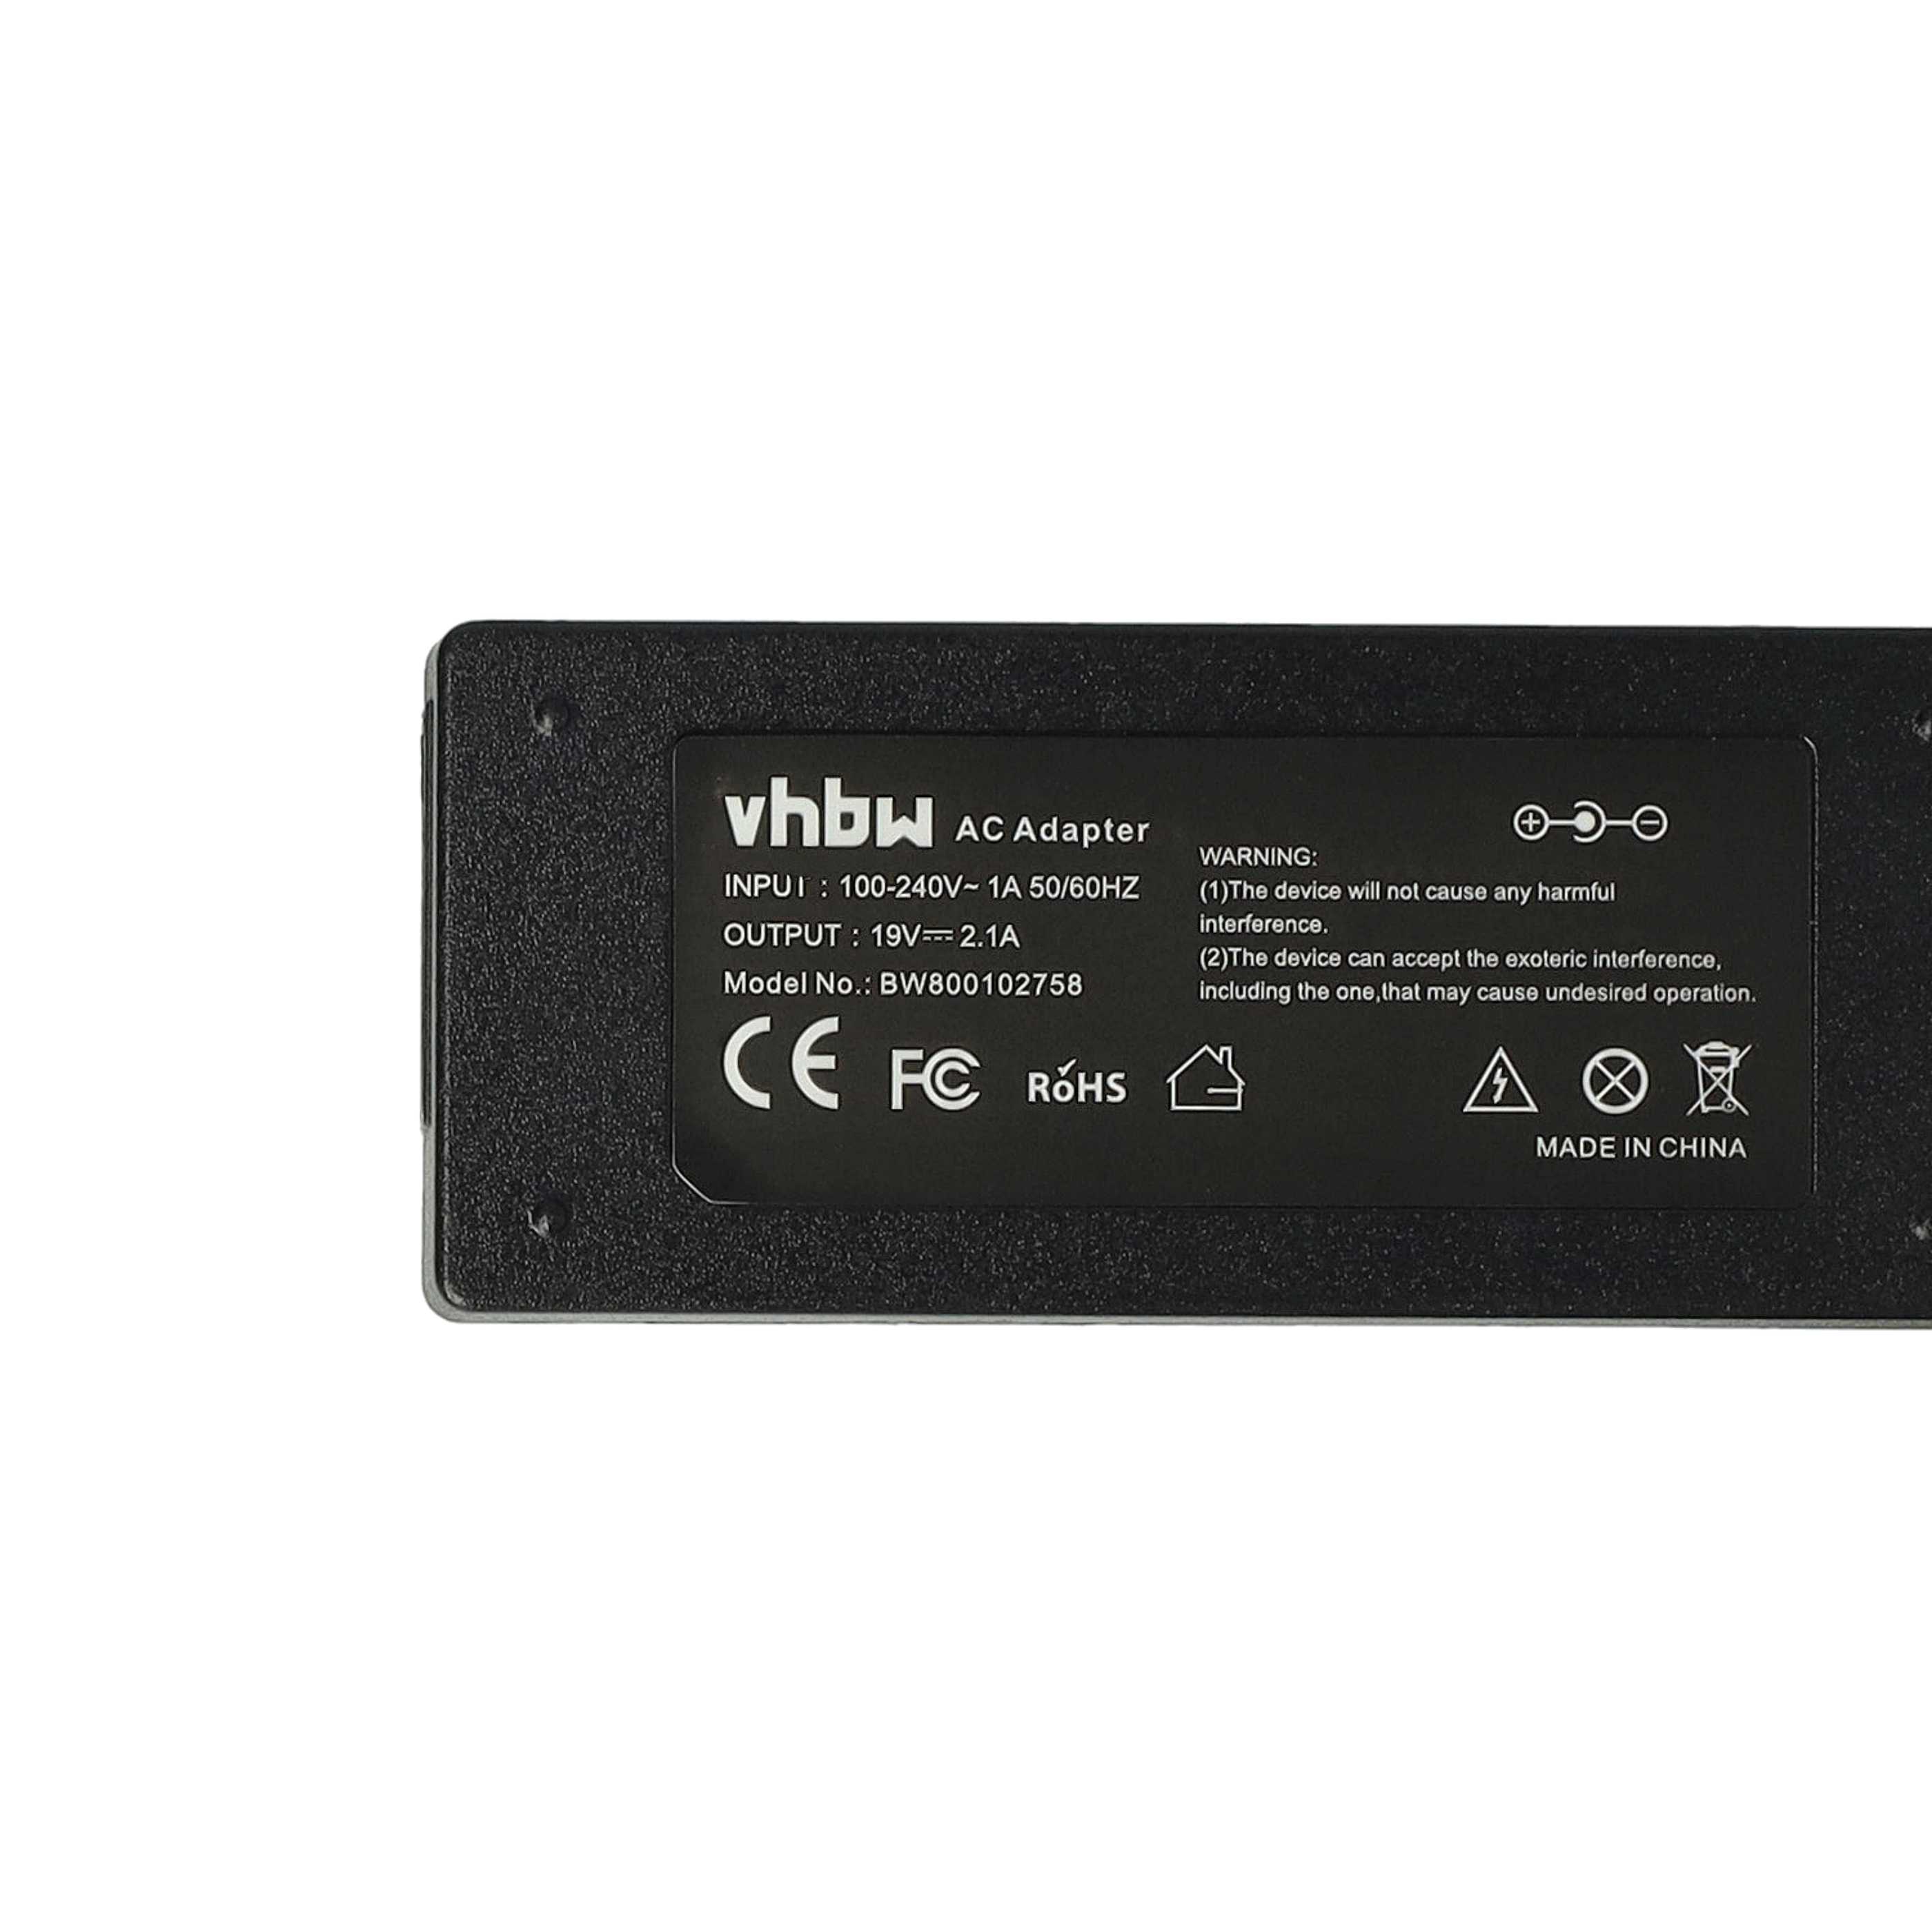 Mains Power Adapter replaces AD-6019 for SamsungNotebook, 40 W